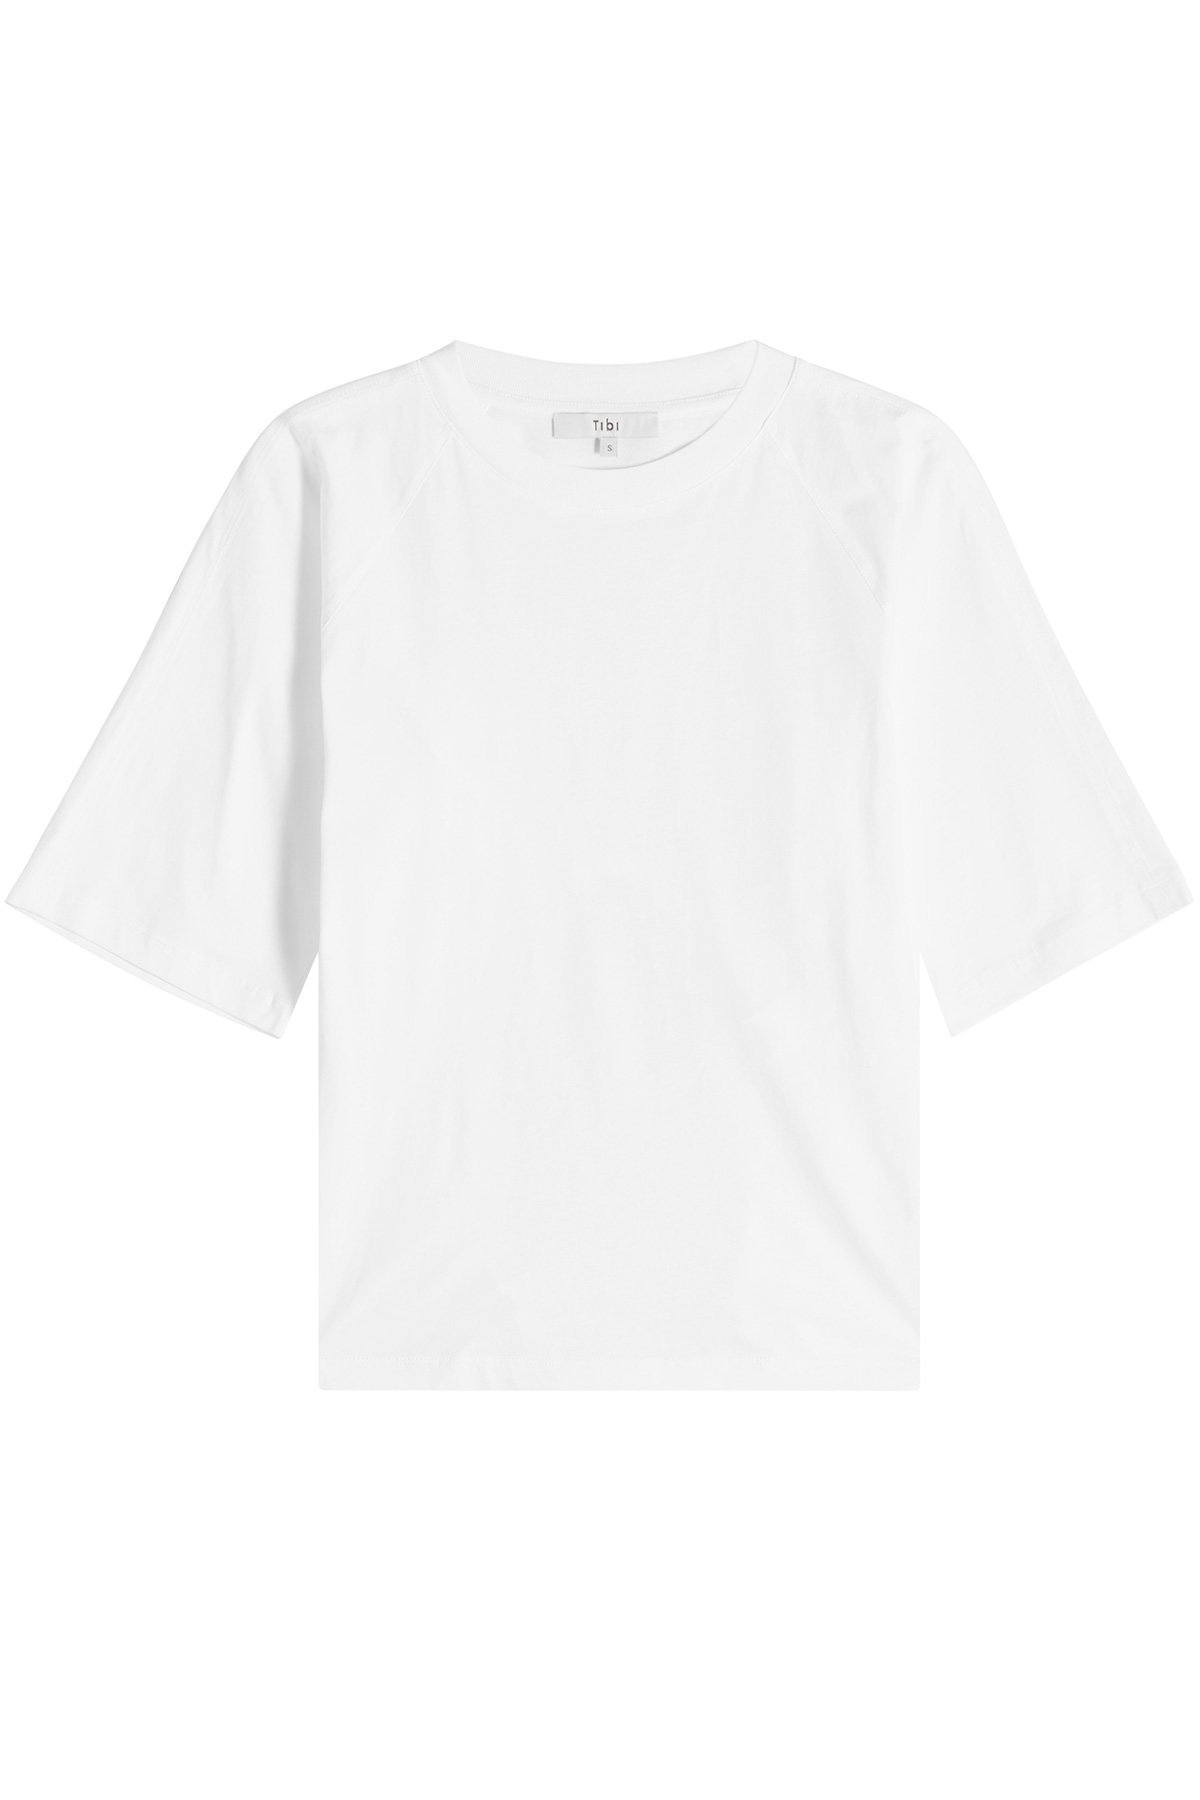 Tibi - Cotton T-Shirt with Cut-Out